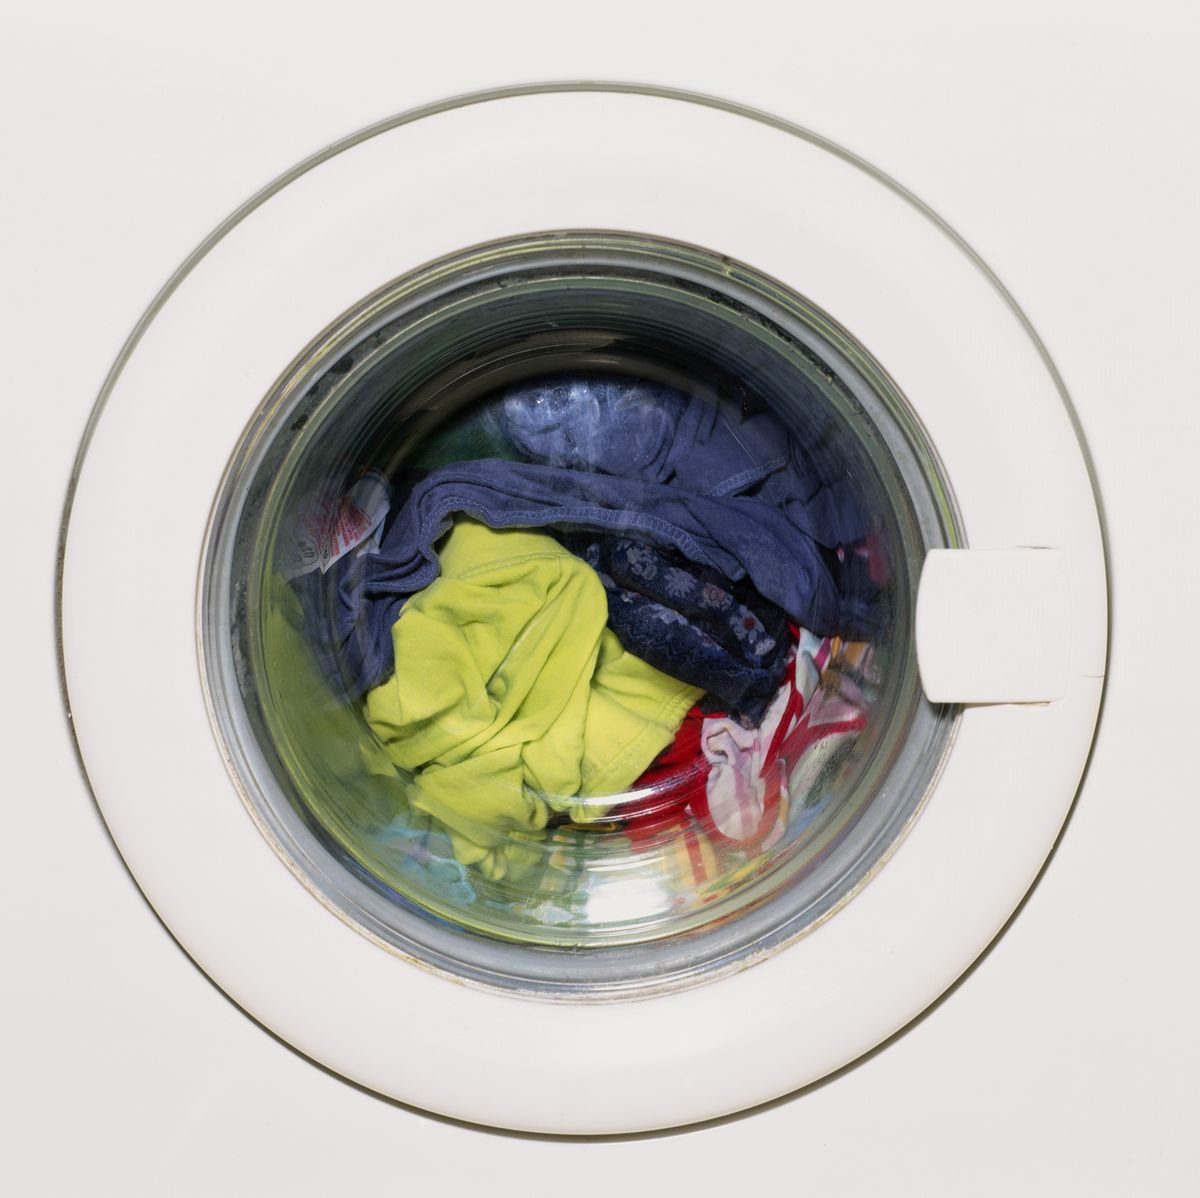 How to Wash Workout Clothes - Best Detergent and Ways to Clean